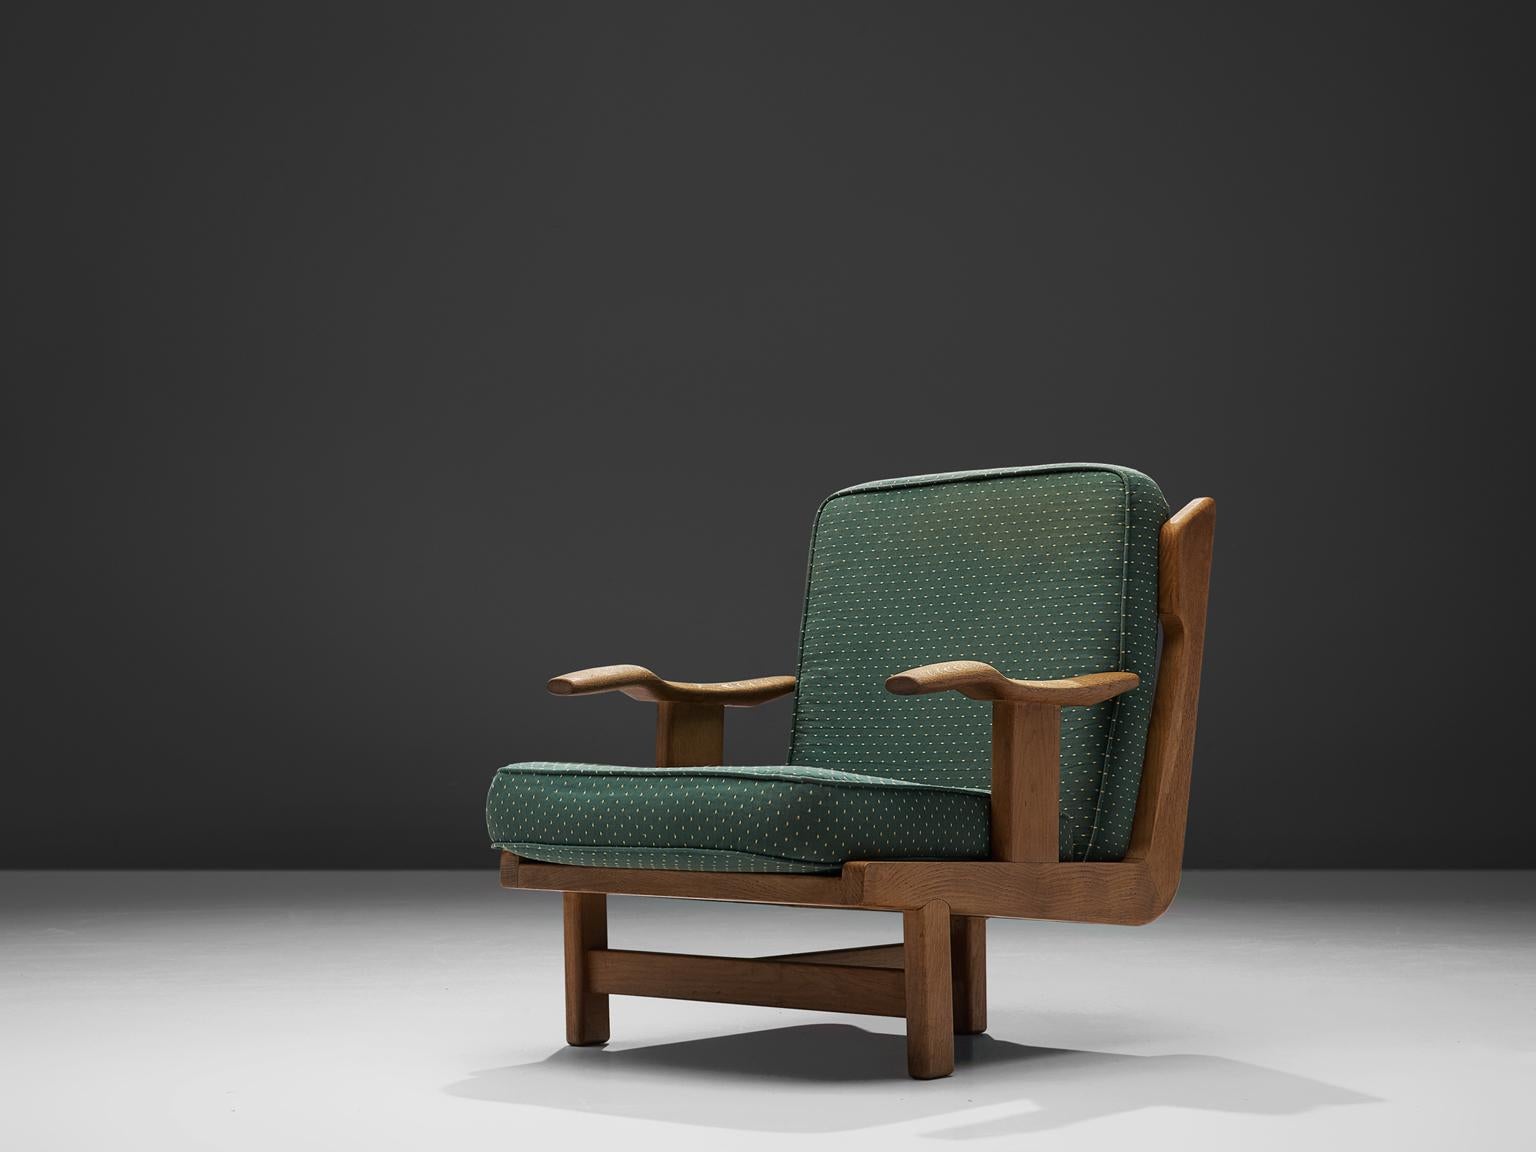 Guillerme & Chambron, oak chairs with green fabric upholstery, France, 1960s.

This chair has a very interesting back and shows a variety of stunning shapes and well designed lines, such as the armrest and the elegant softly edged square on the